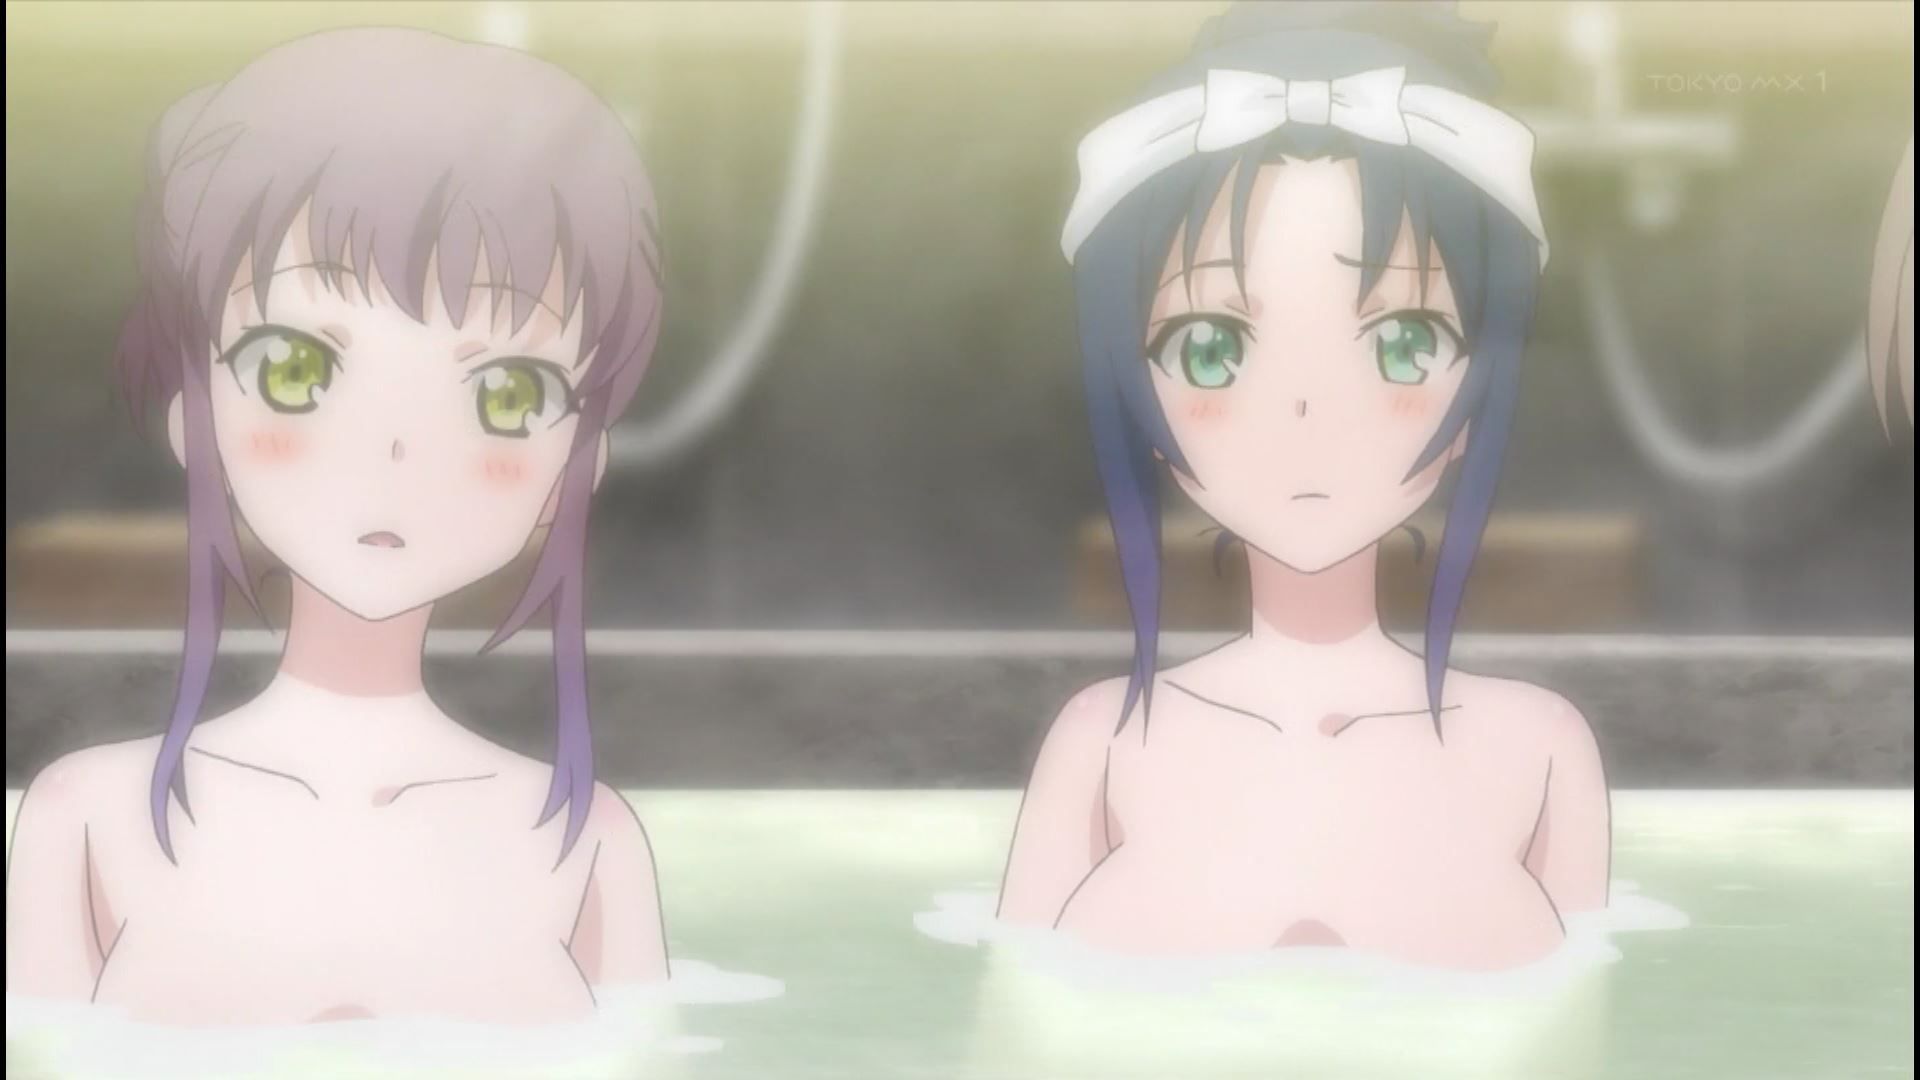 Anime [Armored Daughter Fighting Machine] 7 stories such as hot spring bathing scene where girls' nakedness is not glowing! 10